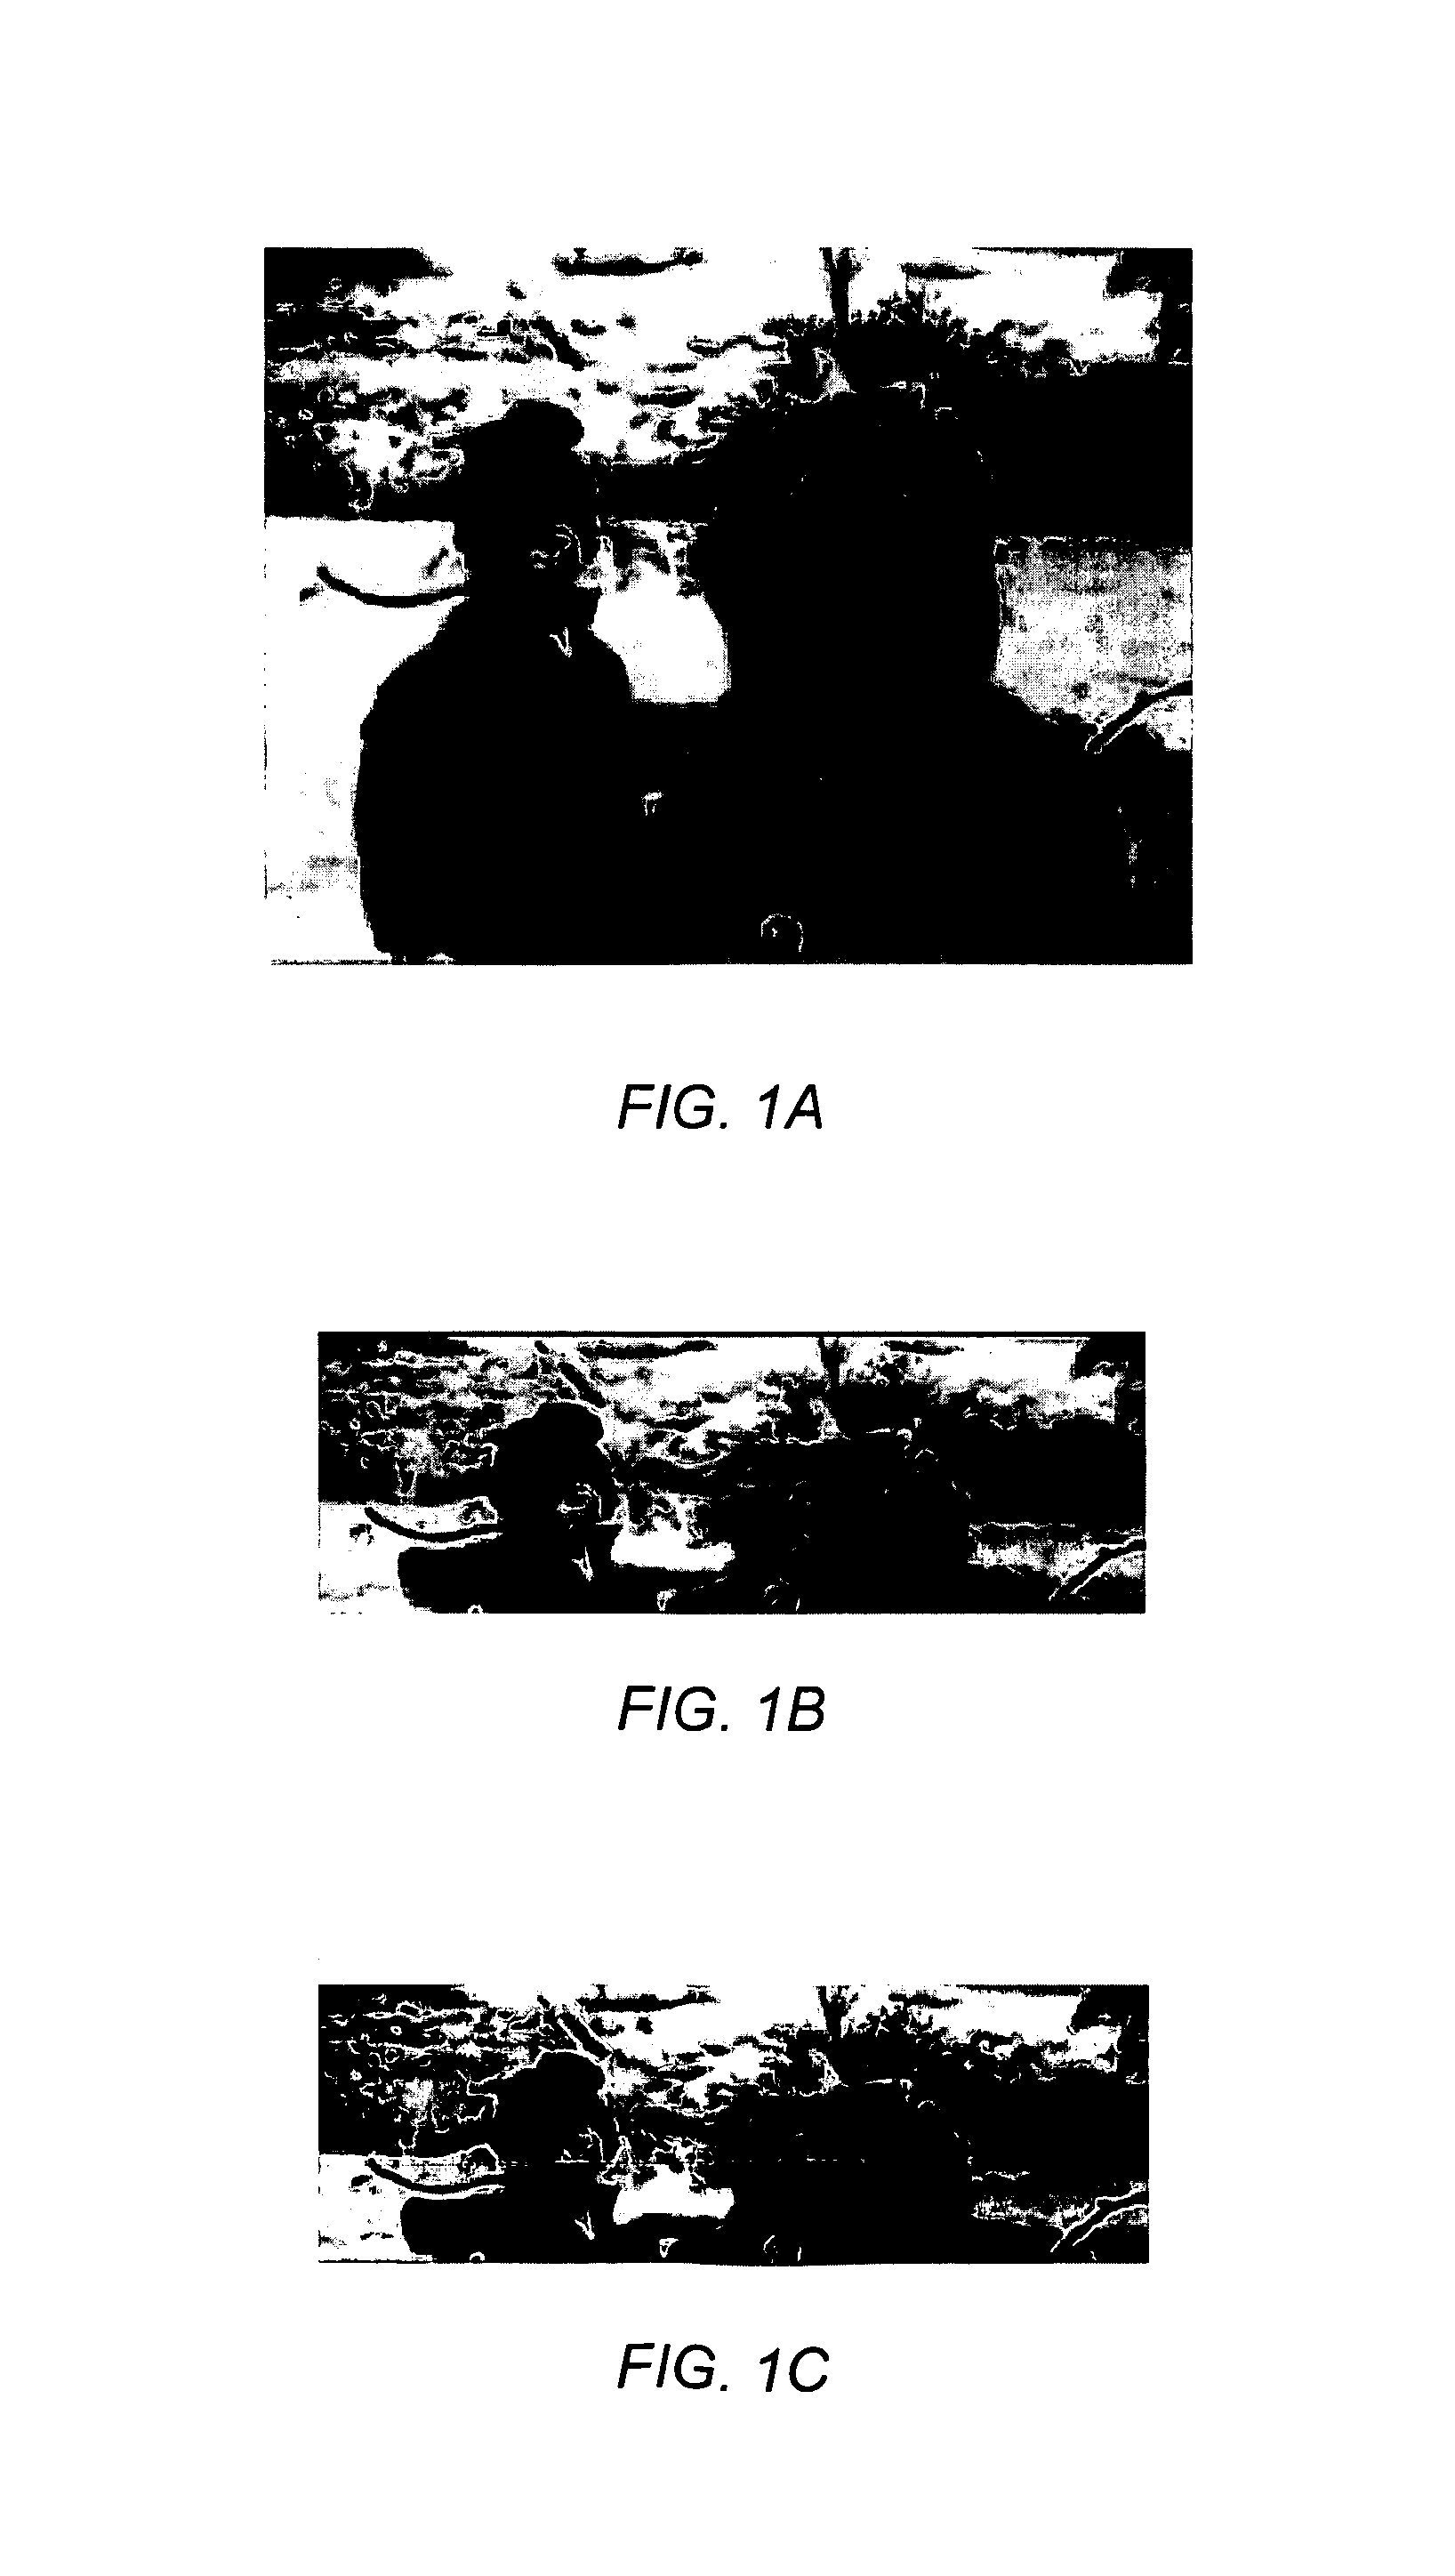 System and method for automatic skin tone detection in images